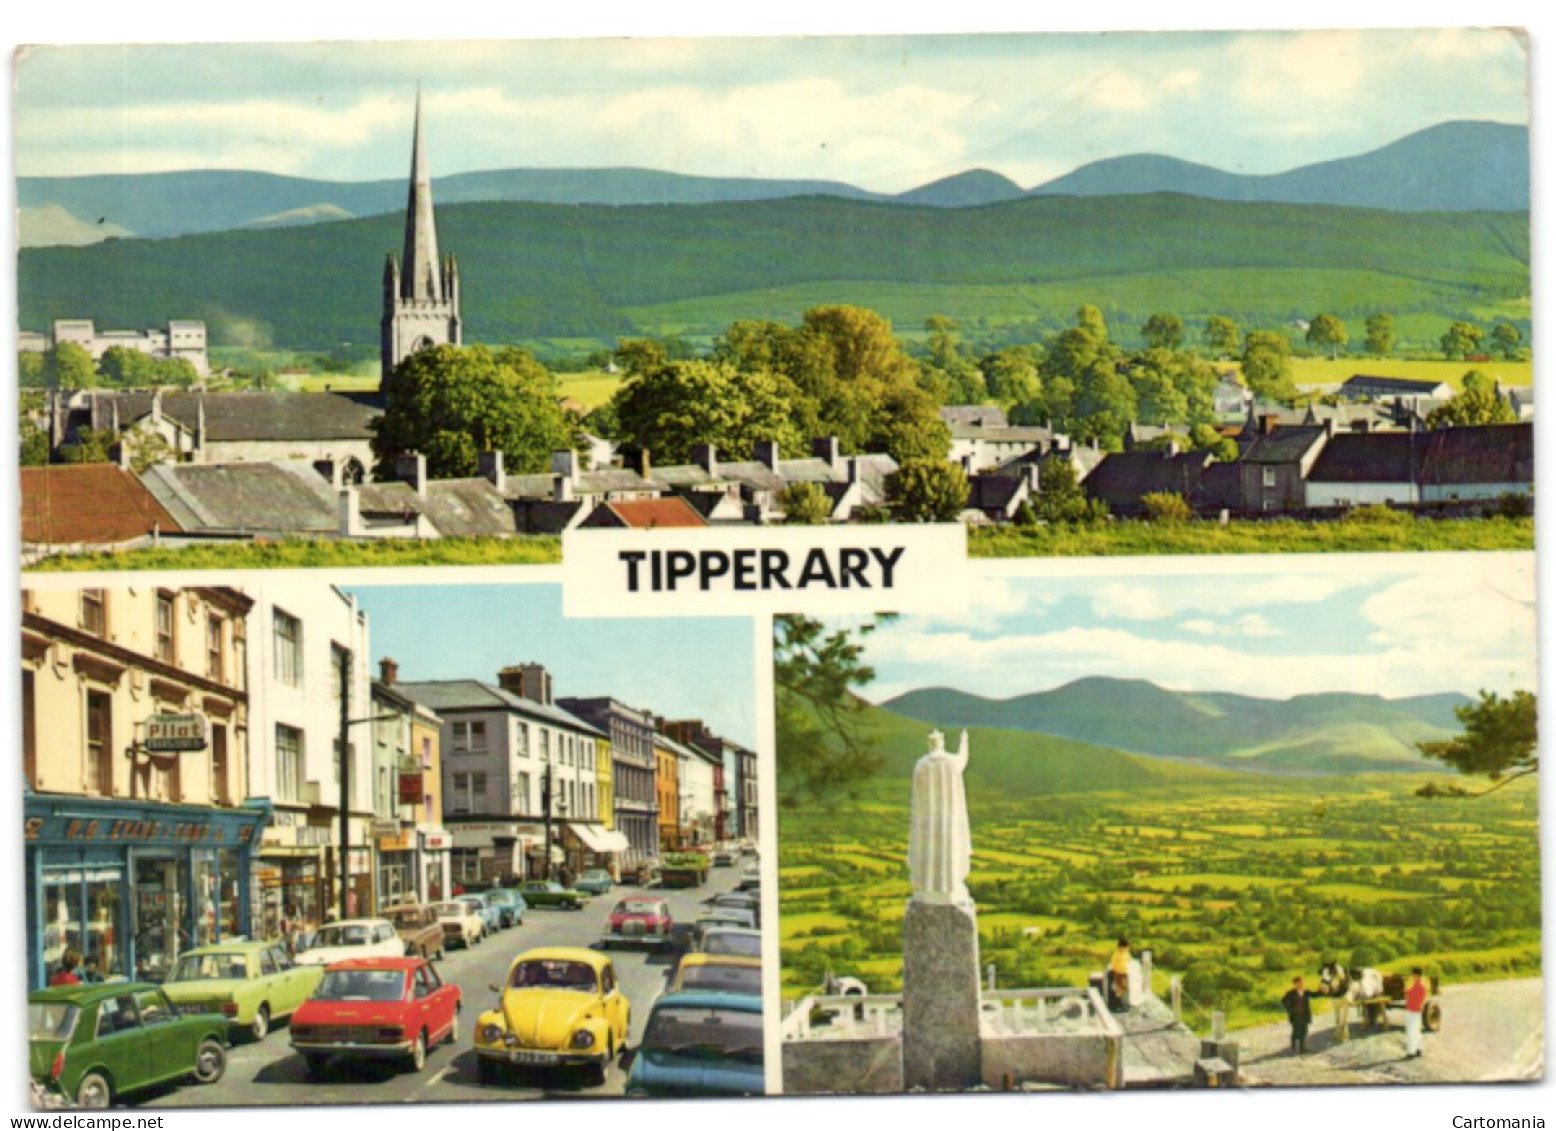 Tipperary Town - Tipperary